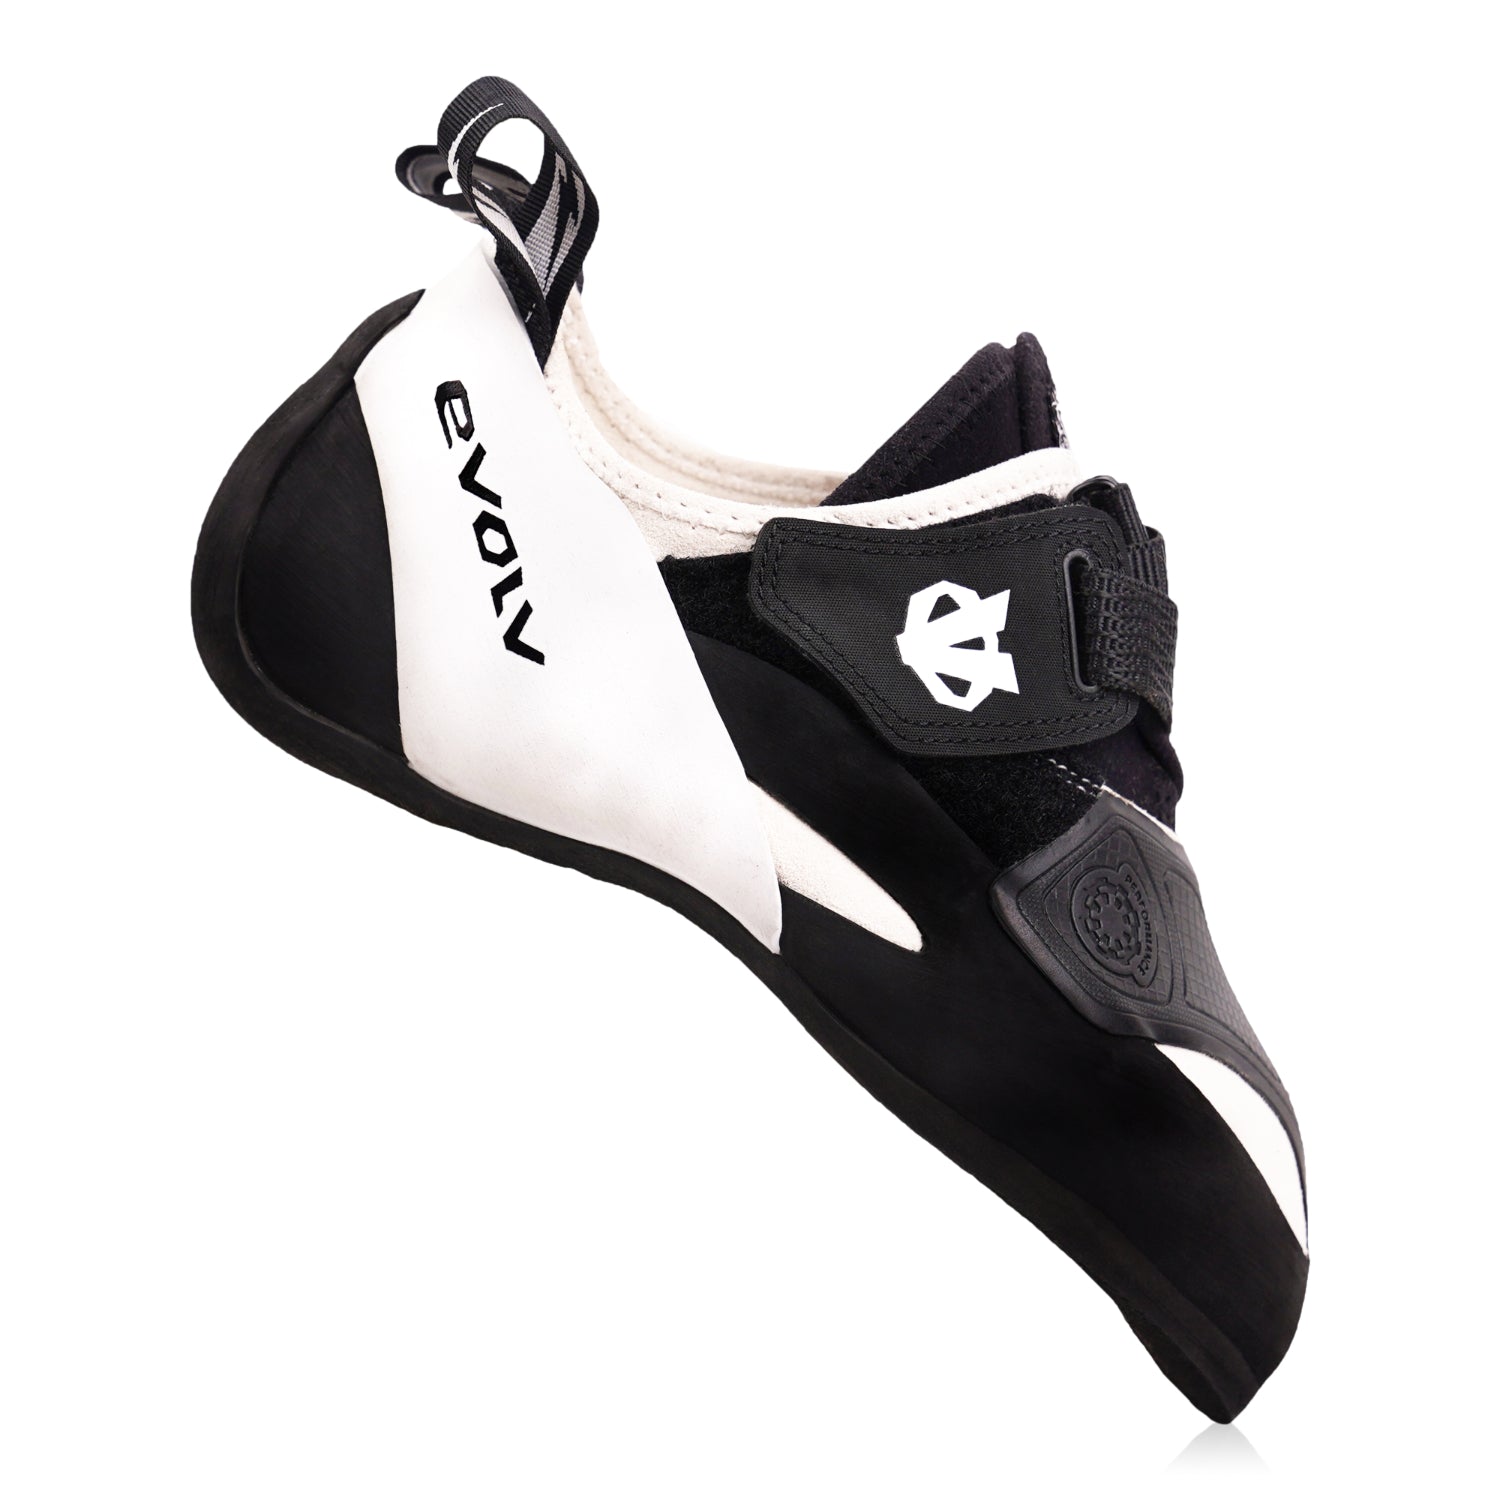 Evolv V6 climbing shoes in black and white